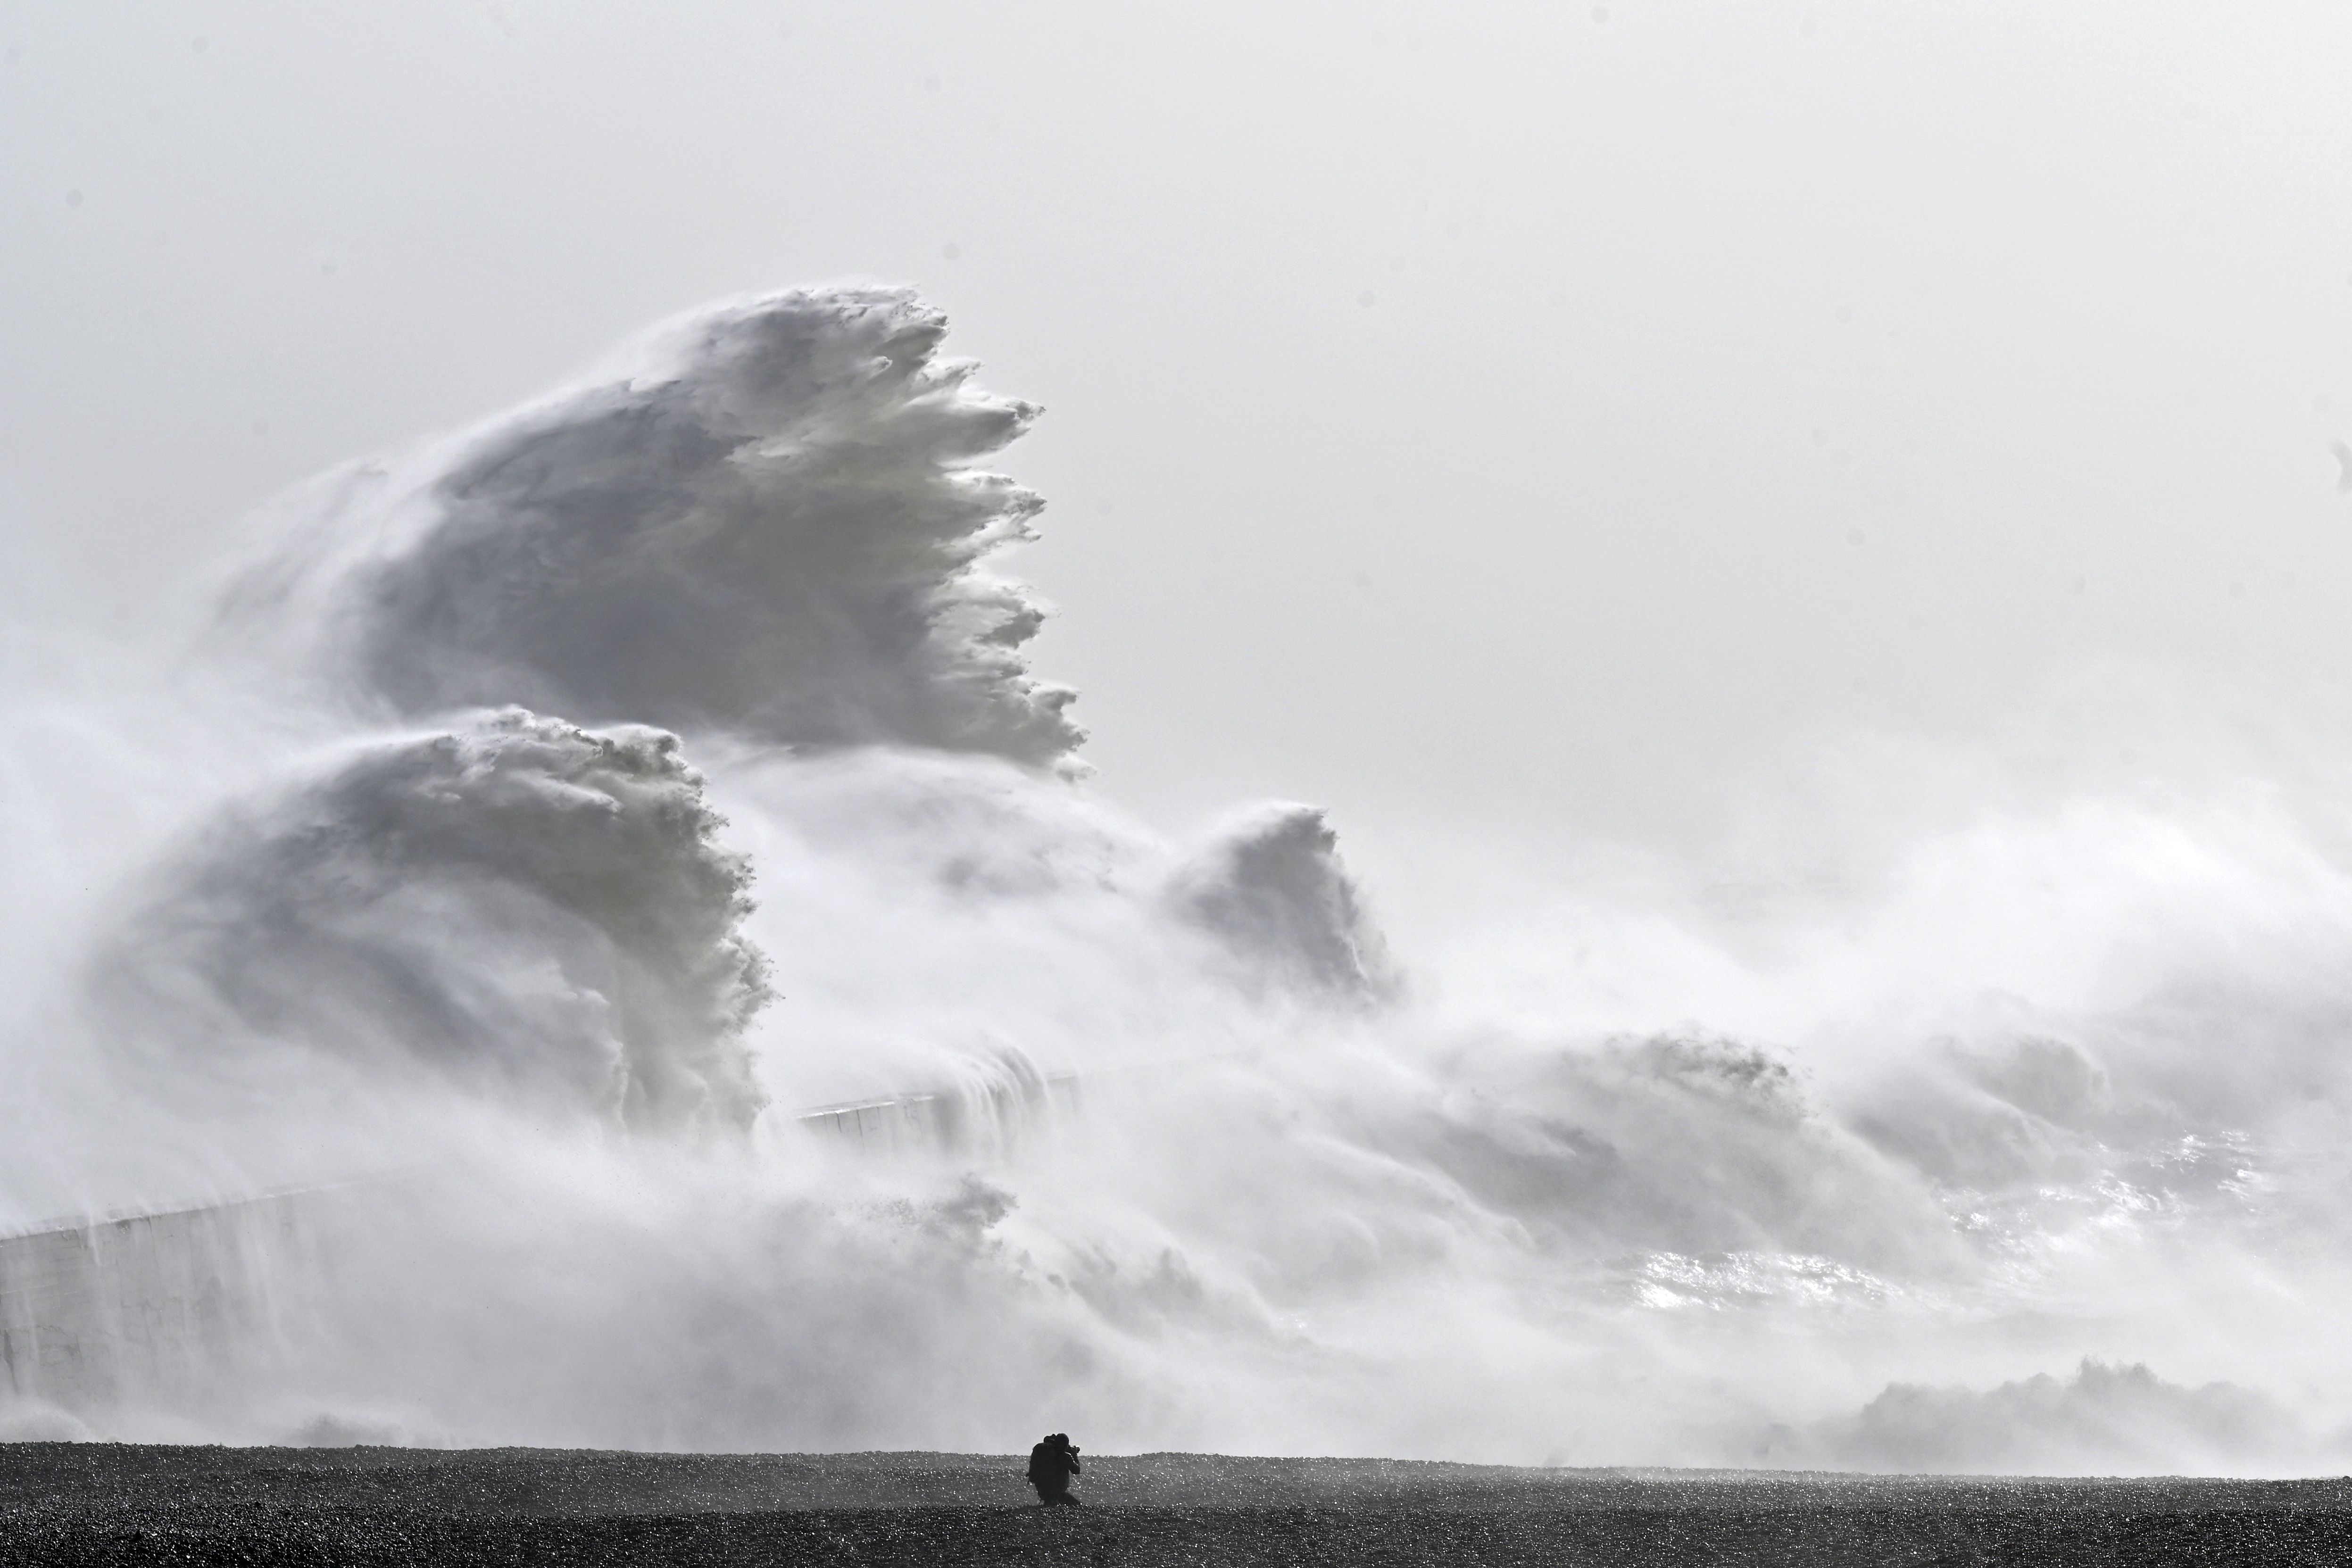 Waves crashed over Newhaven Harbor wall in Newhaven, southern England on Feb. 18, as Storm Eunice brought high winds across the country. Powerful storms such as this are becoming more frequent due to human induced climate change.